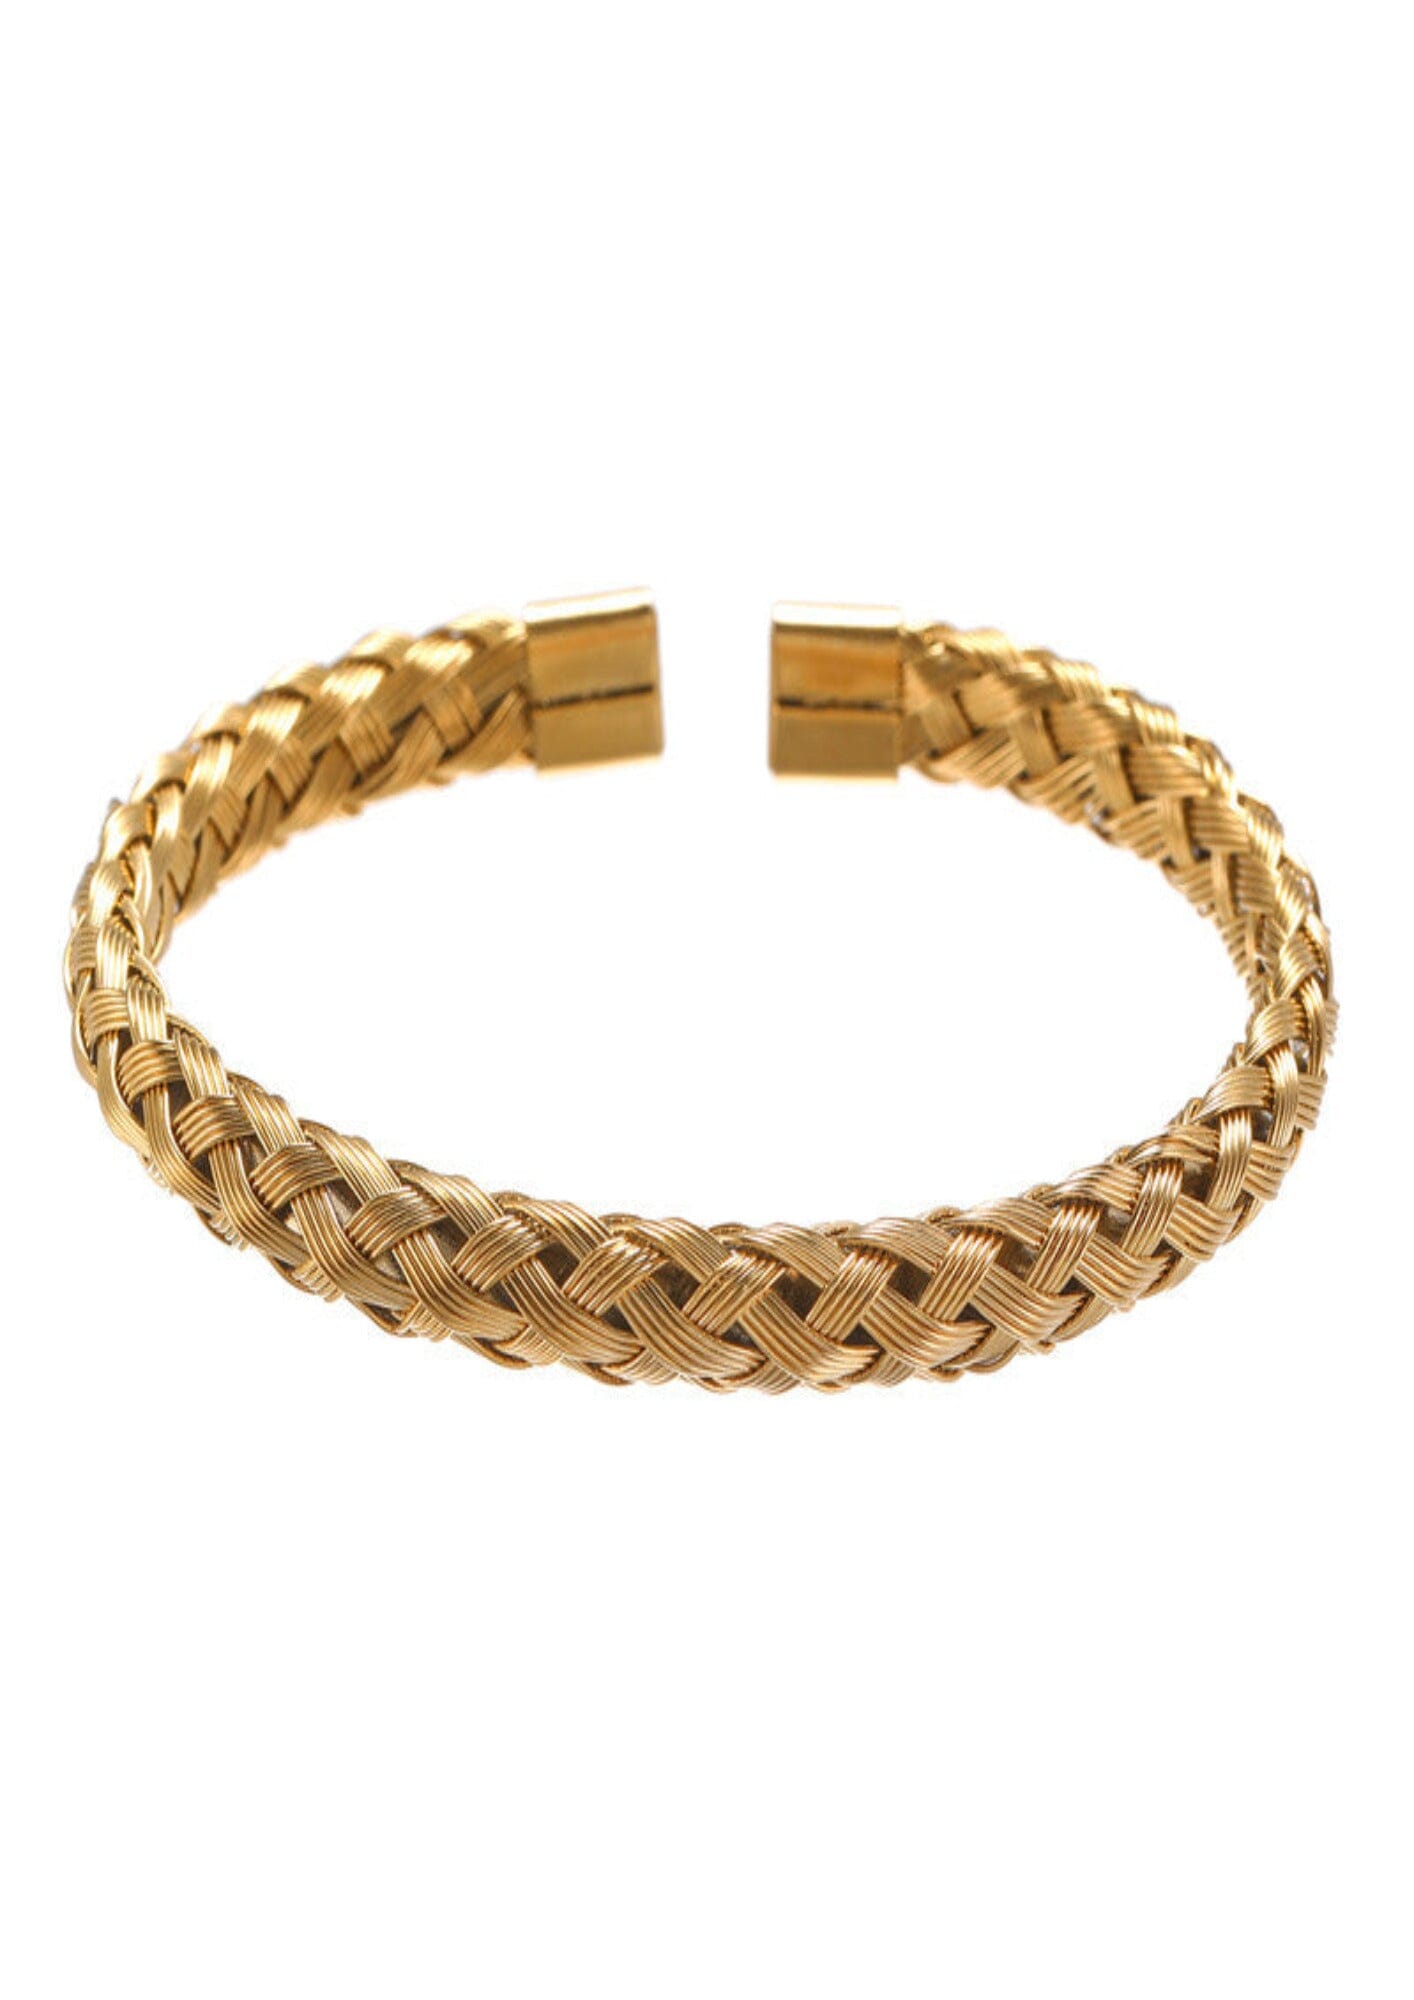 WOVEN BANGLE - GOLD ring Yubama Jewelry Online Store - The Elegant Designs of Gold and Silver ! Gold 